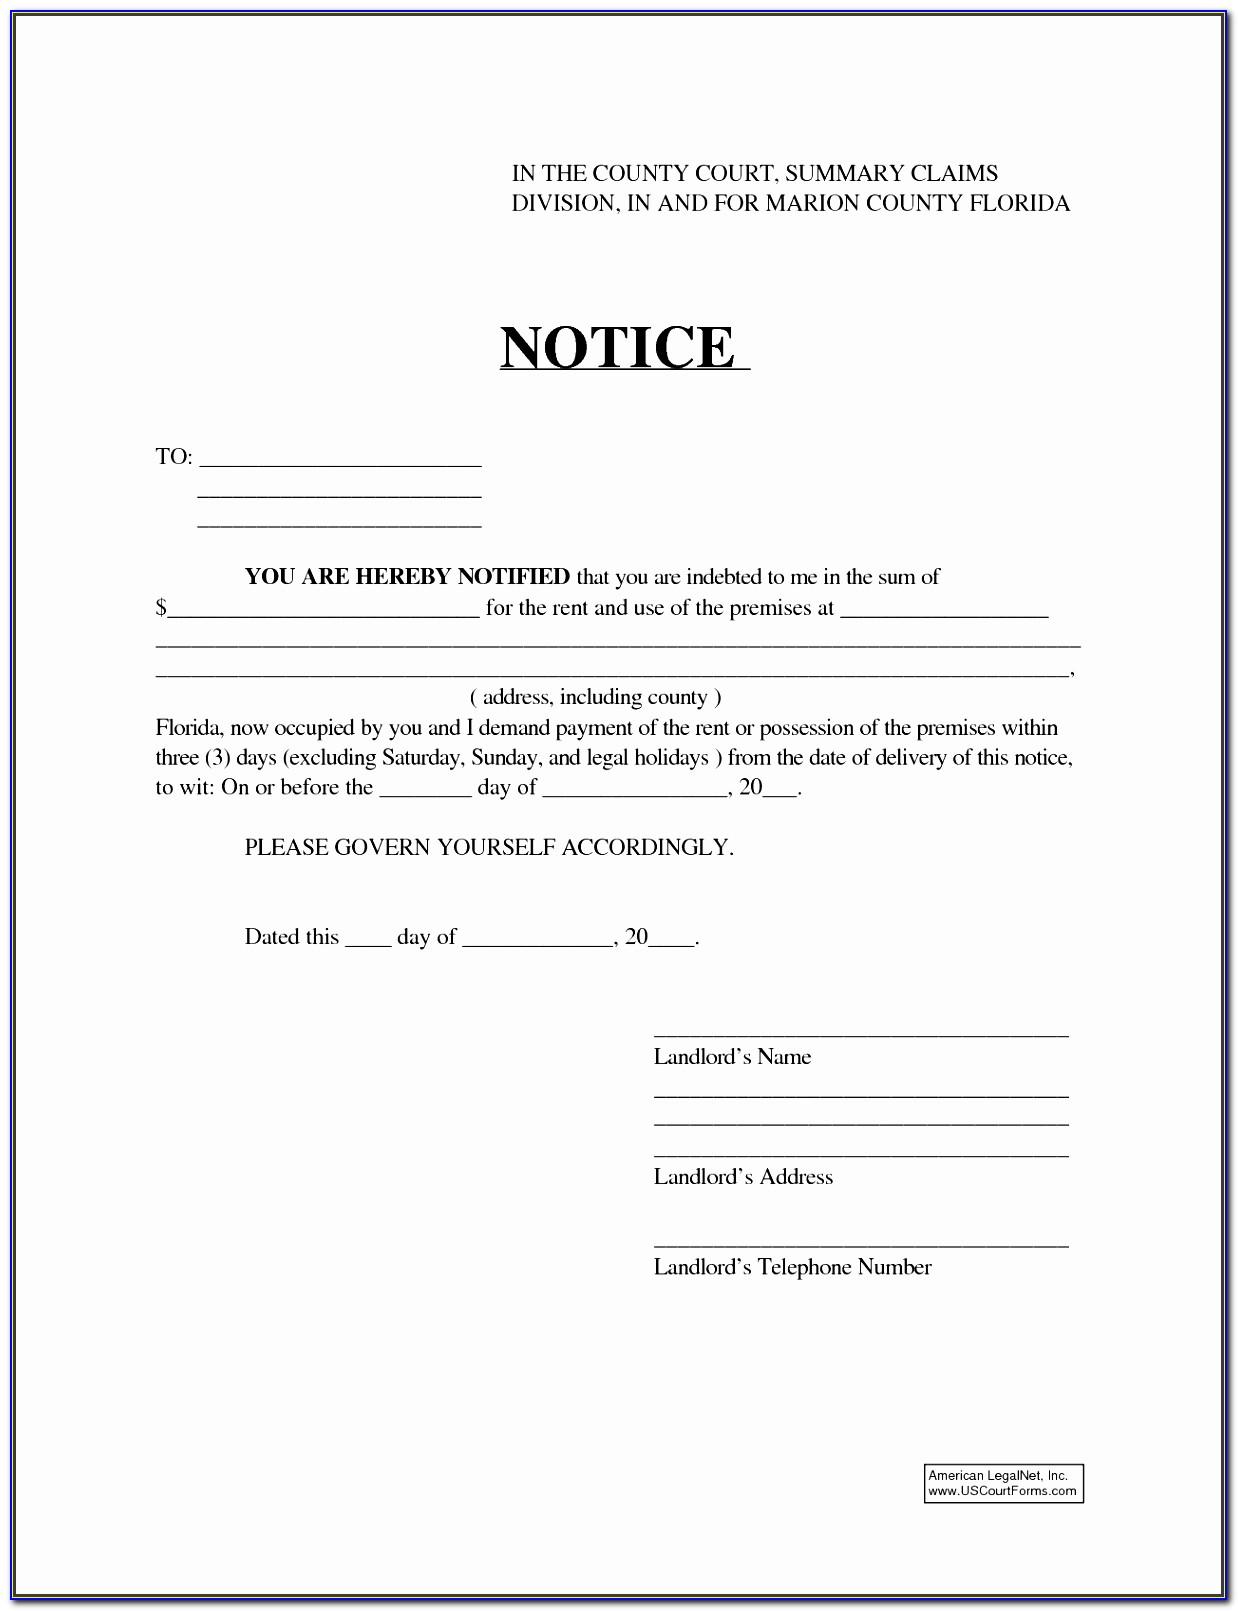 eviction-notice-templates-5dnpf-best-of-eviction-notice-9-free-word-pdf-documents-free-form